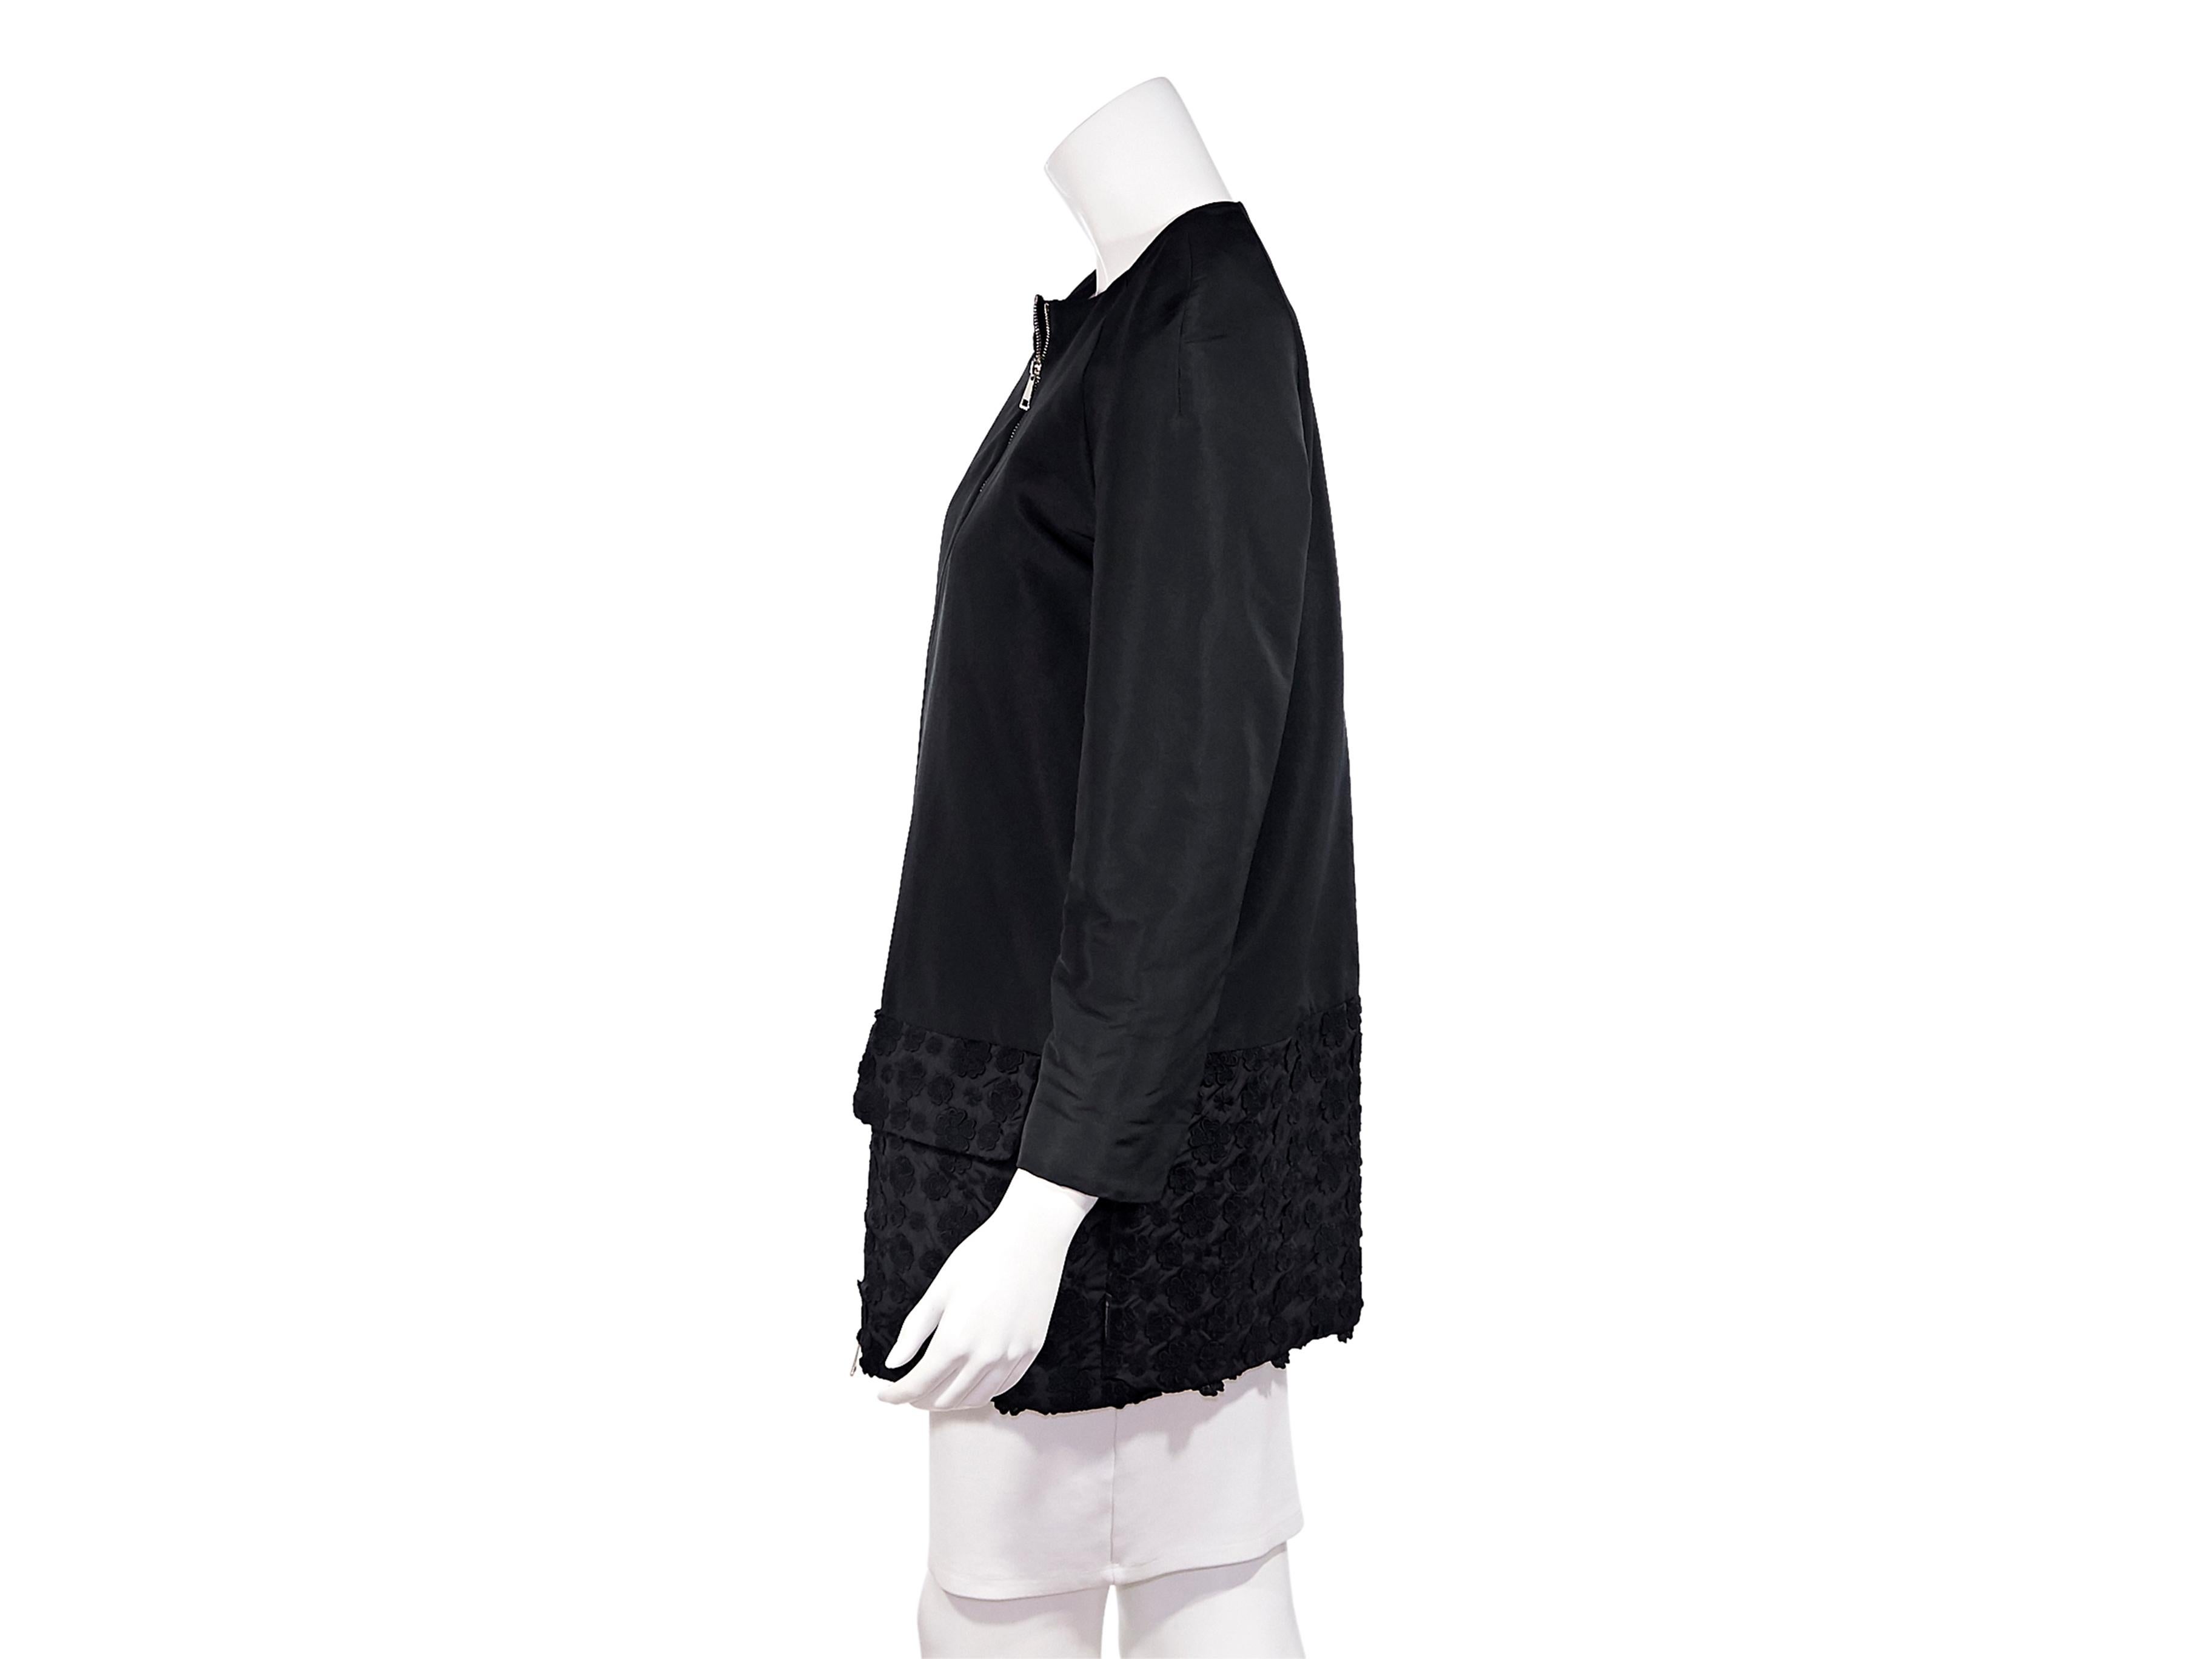 Product detail: Black cotton-shell coat by Moncler. Collarless. Cropped sleeves. Dual flap pockets at hips. Floral-embroidered at hem. Dual zip-front closure. Silver-tone hardware. Pair with a ruffled high-collar top to show off the neckline. The